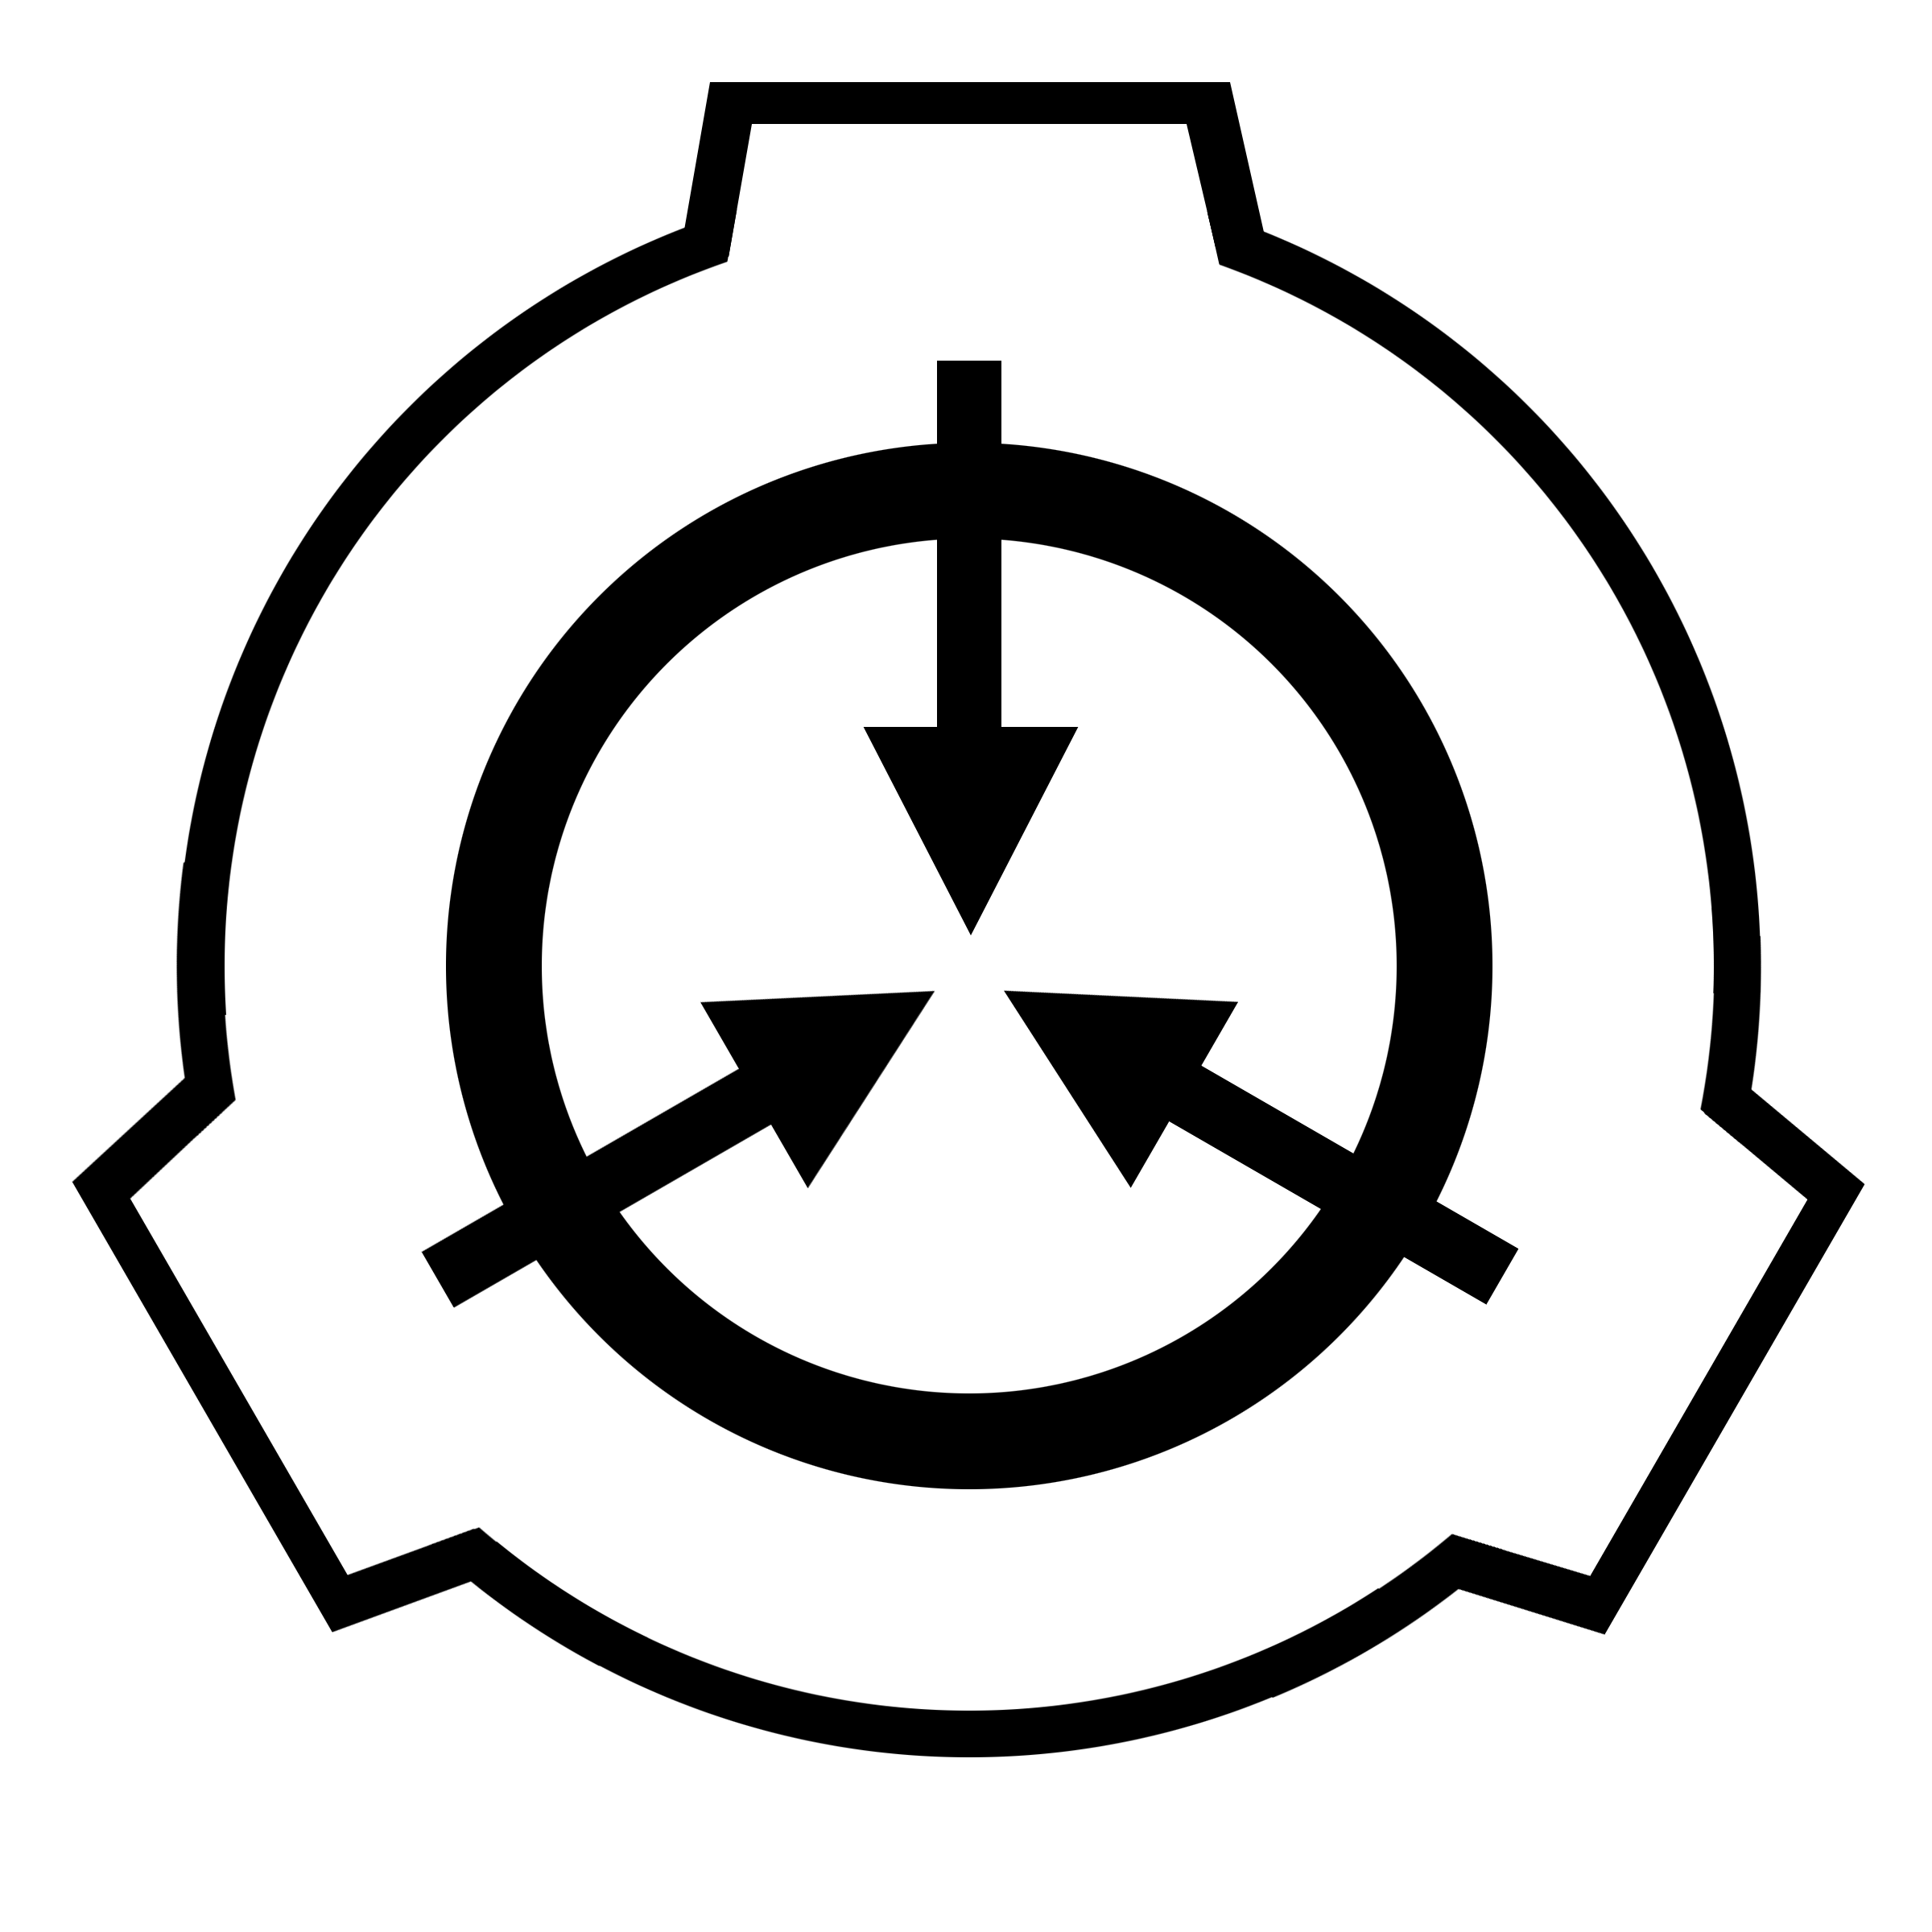 SCP Foundation logo with three evenly space arrows pointed inward over a circle, familiar in appearance to a peace sign made of arrows without meeting at the center